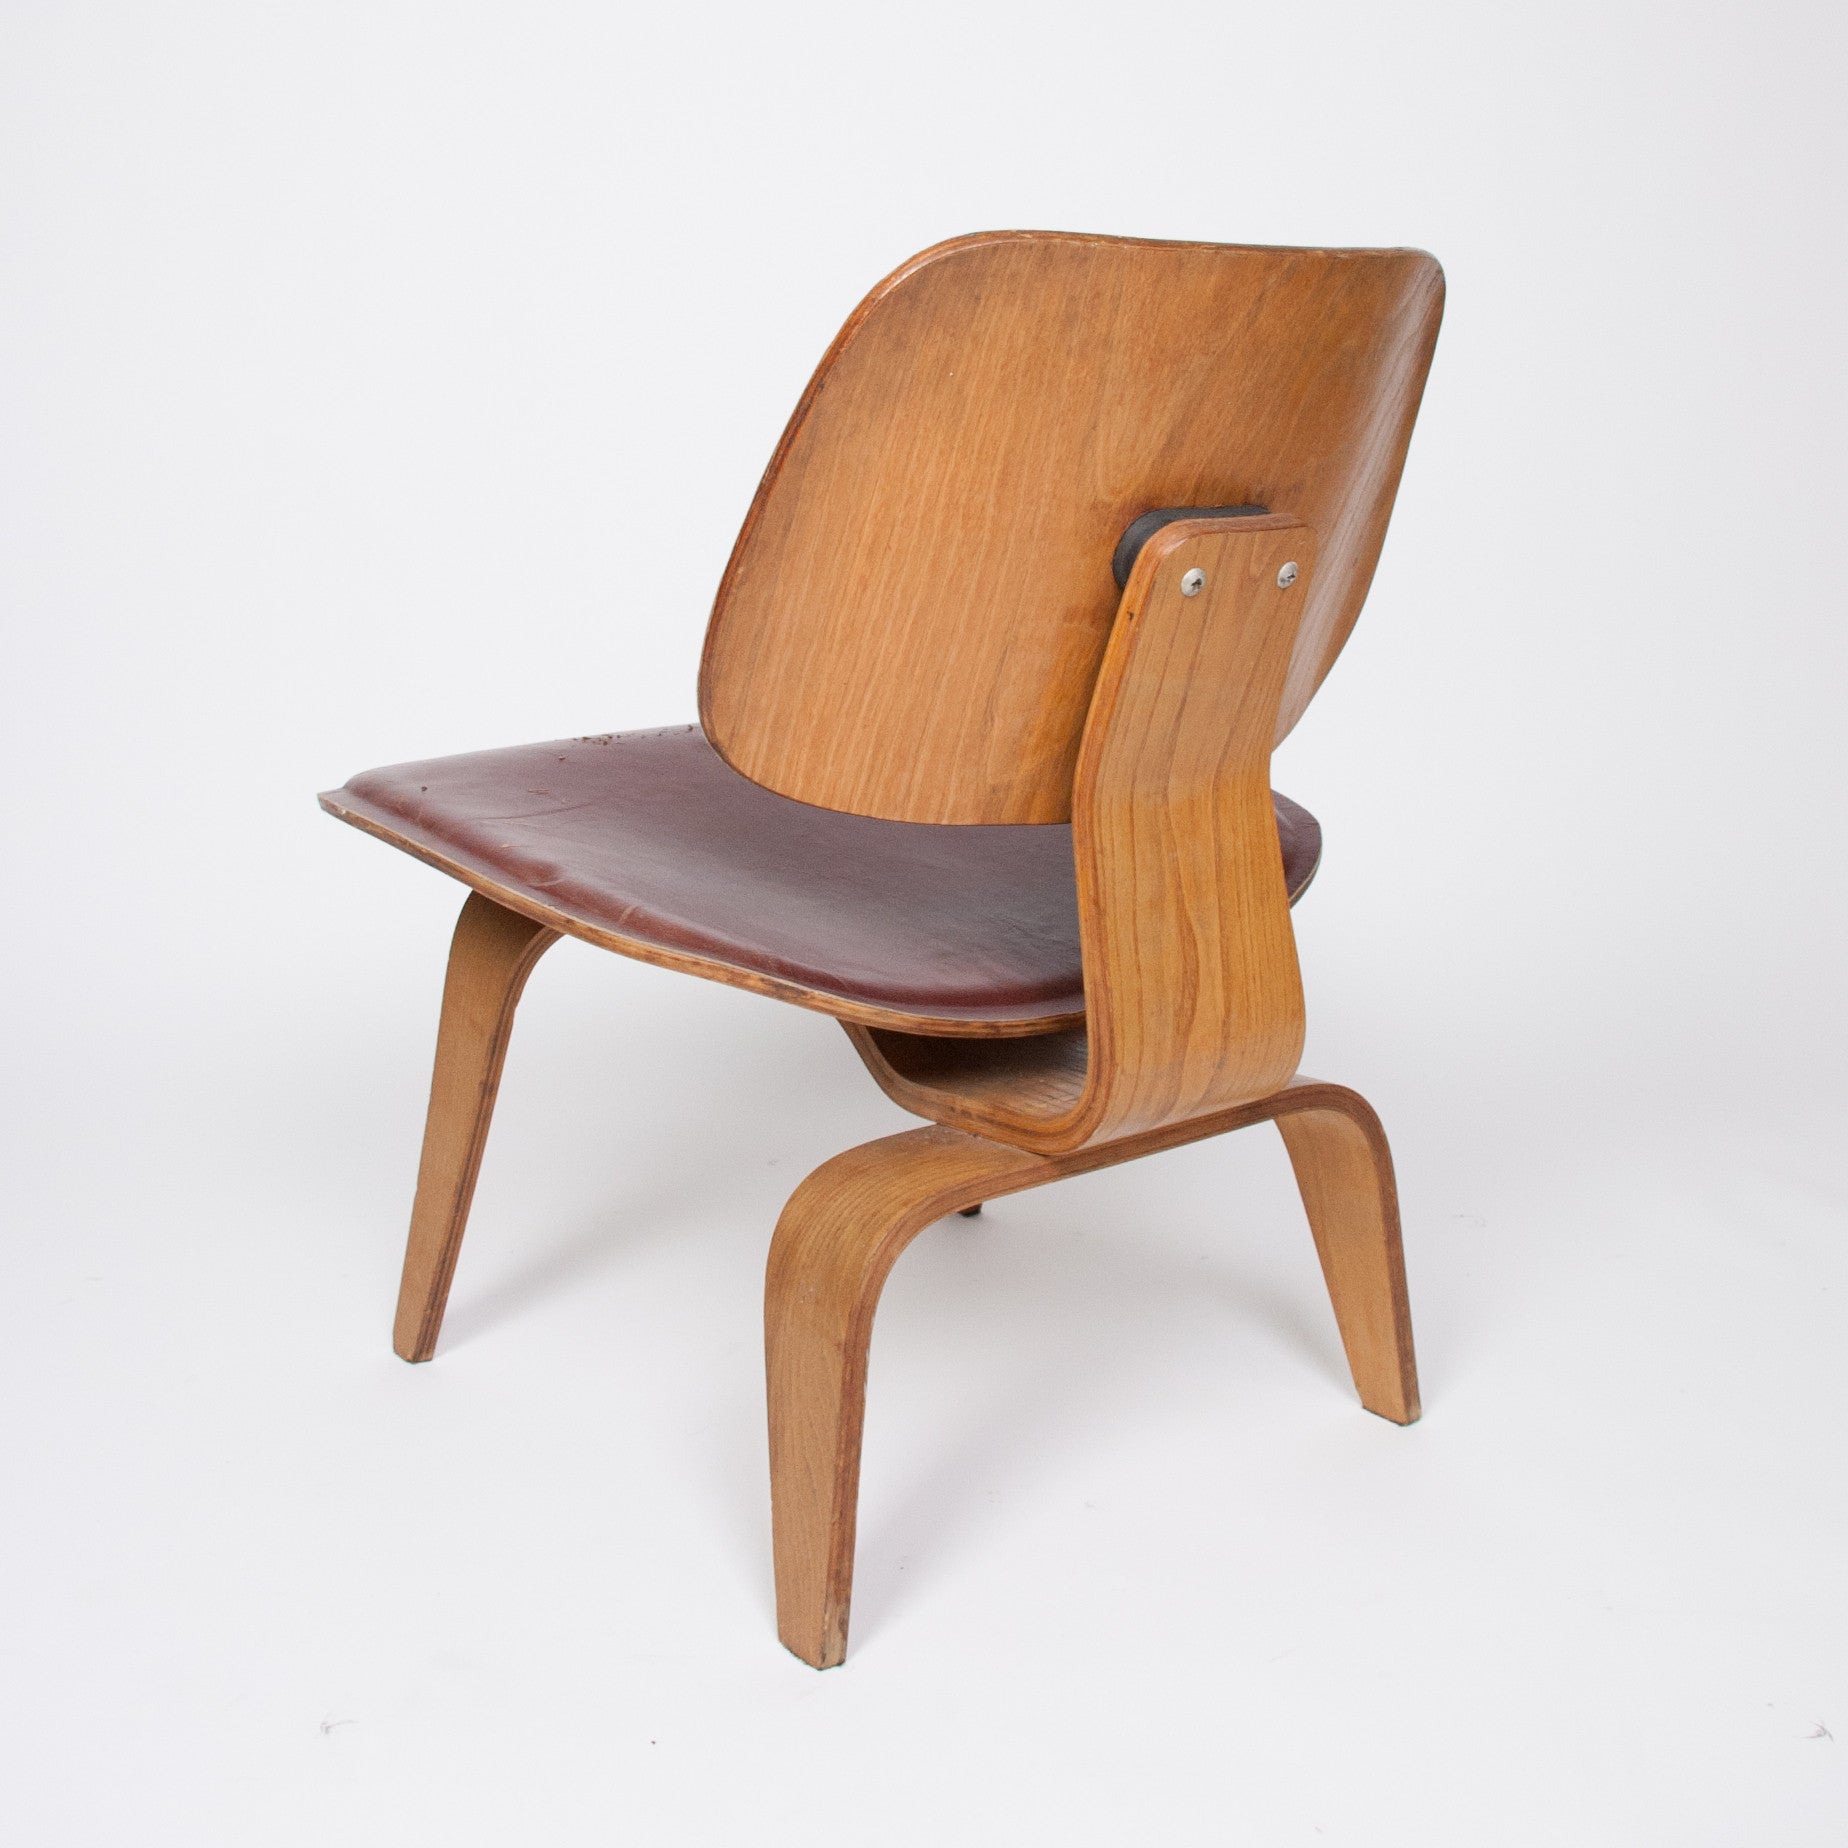 SOLD Eames Evans Herman Miller 1947 LCW Plywood Lounge Chair Leather! 5-2-5